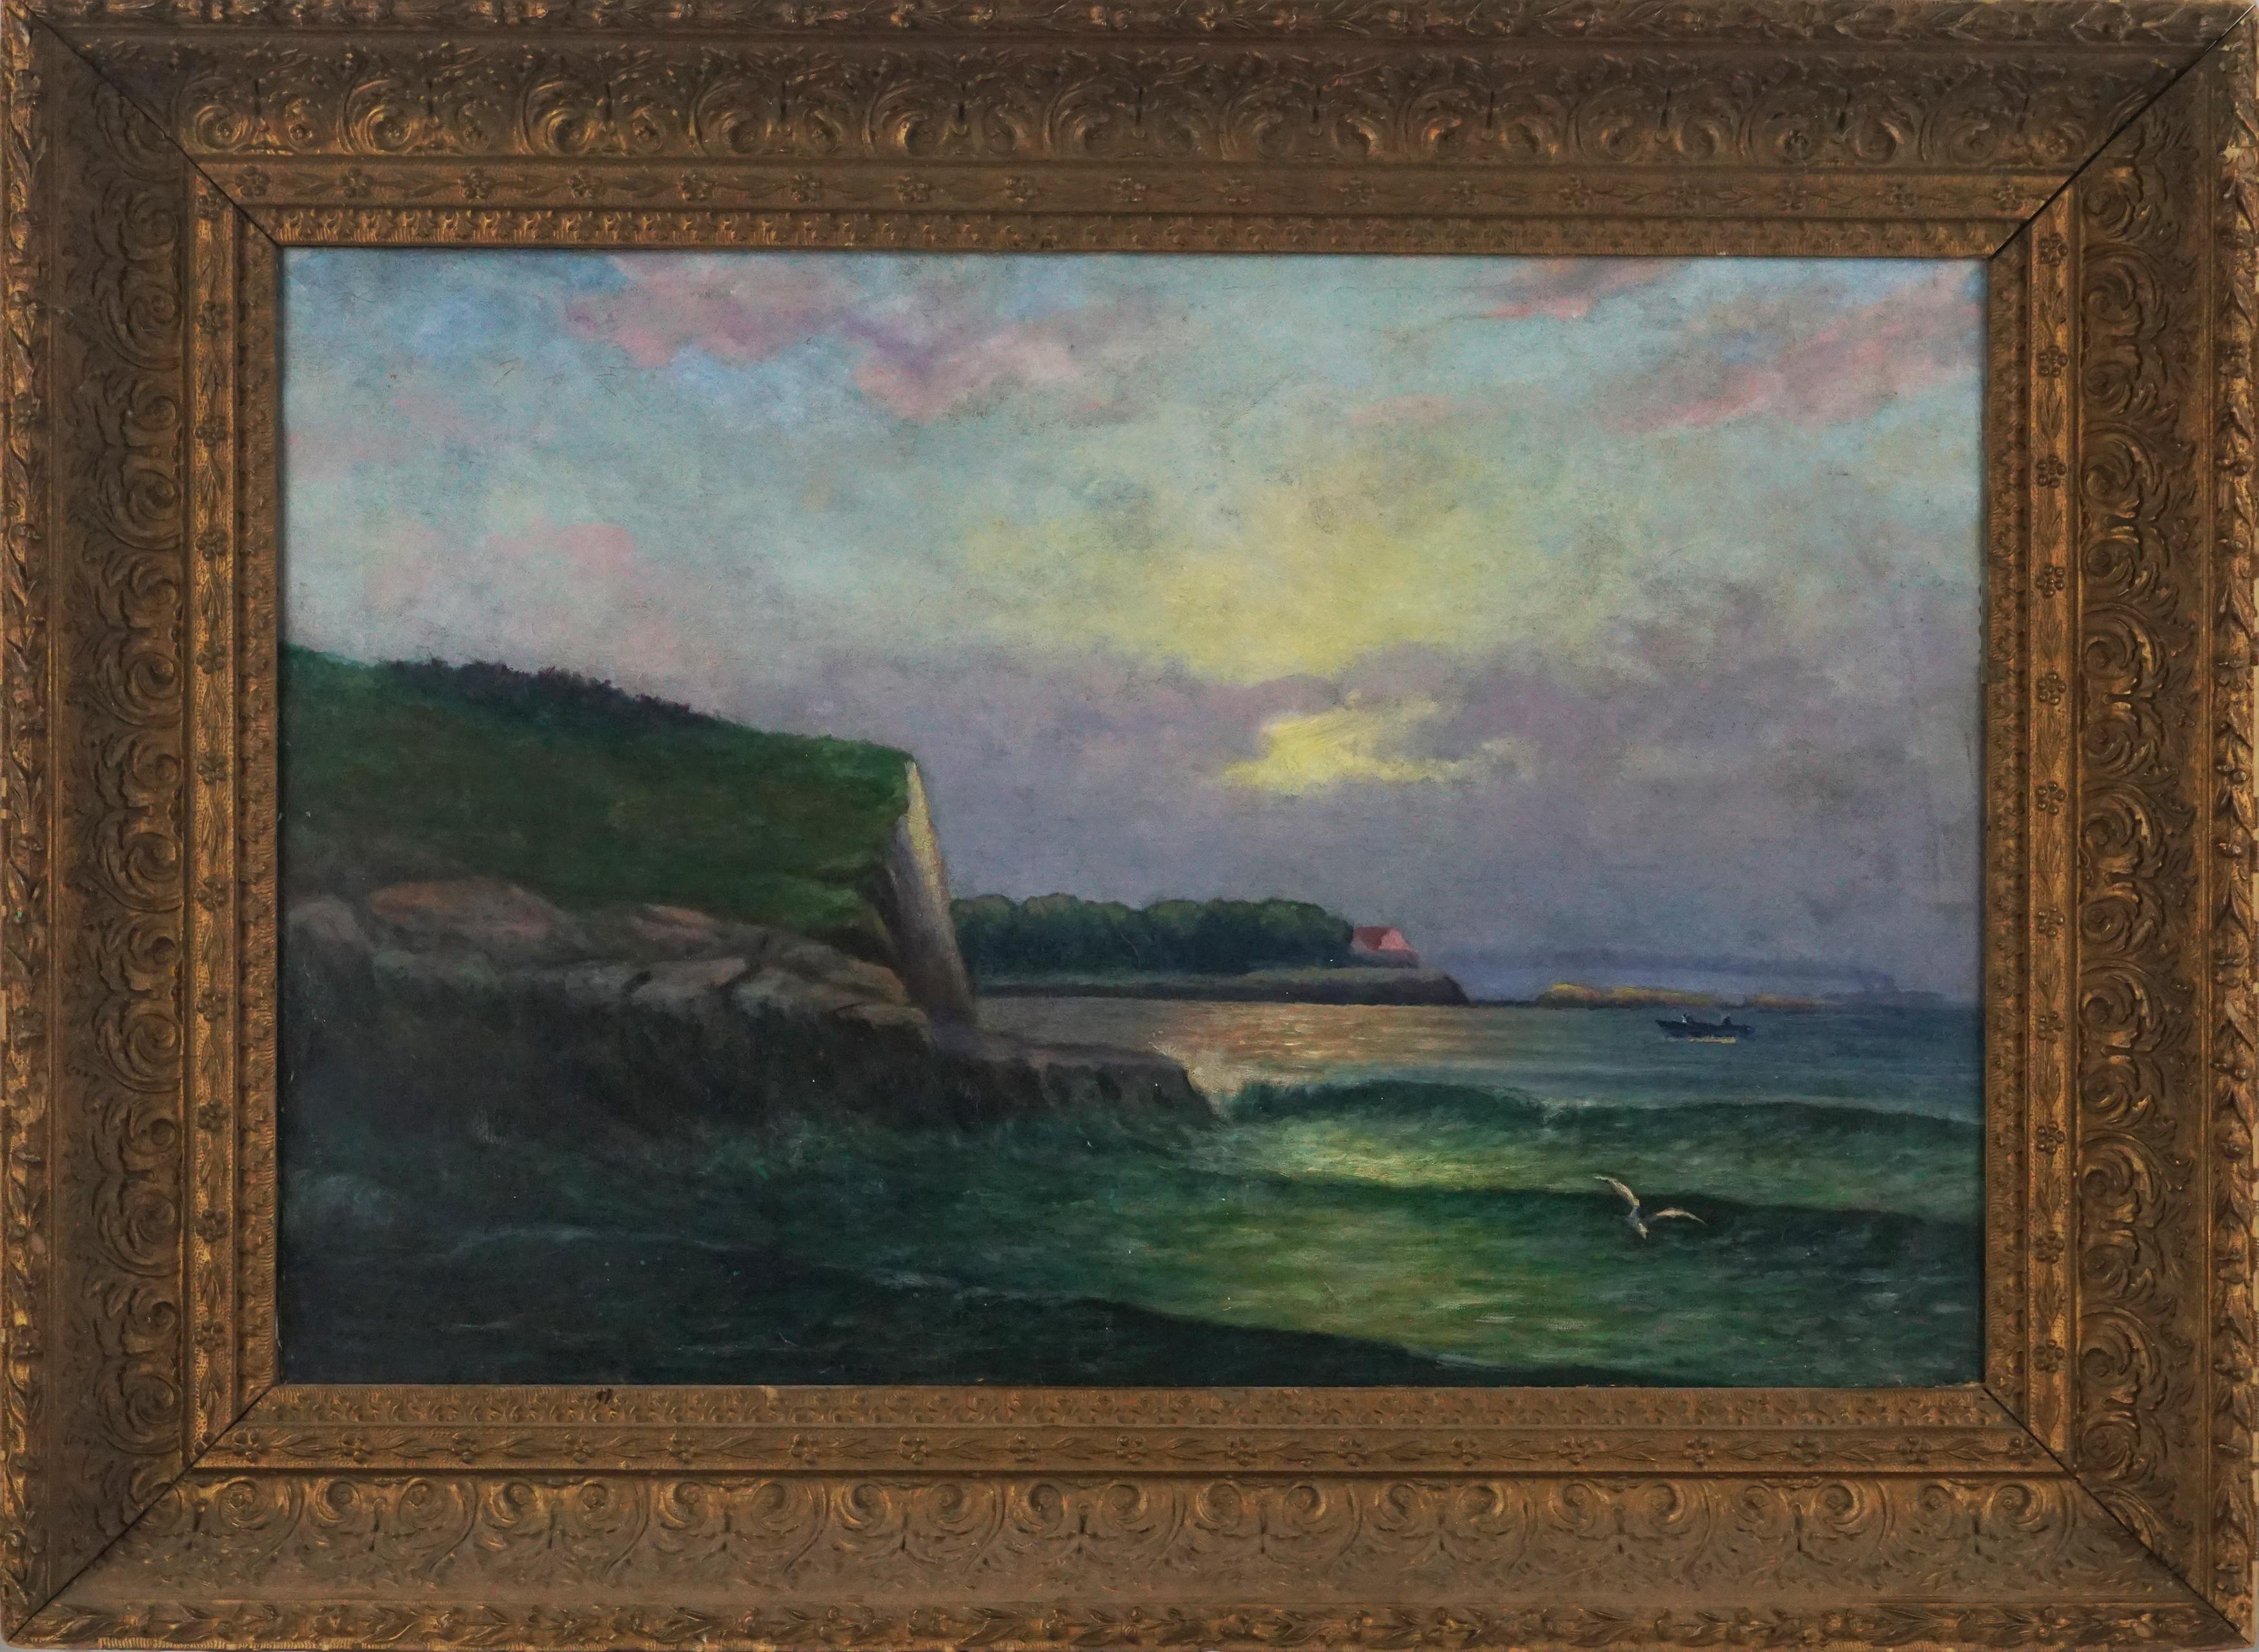 Unknown Figurative Painting - New England Coastal Scene with Steamship